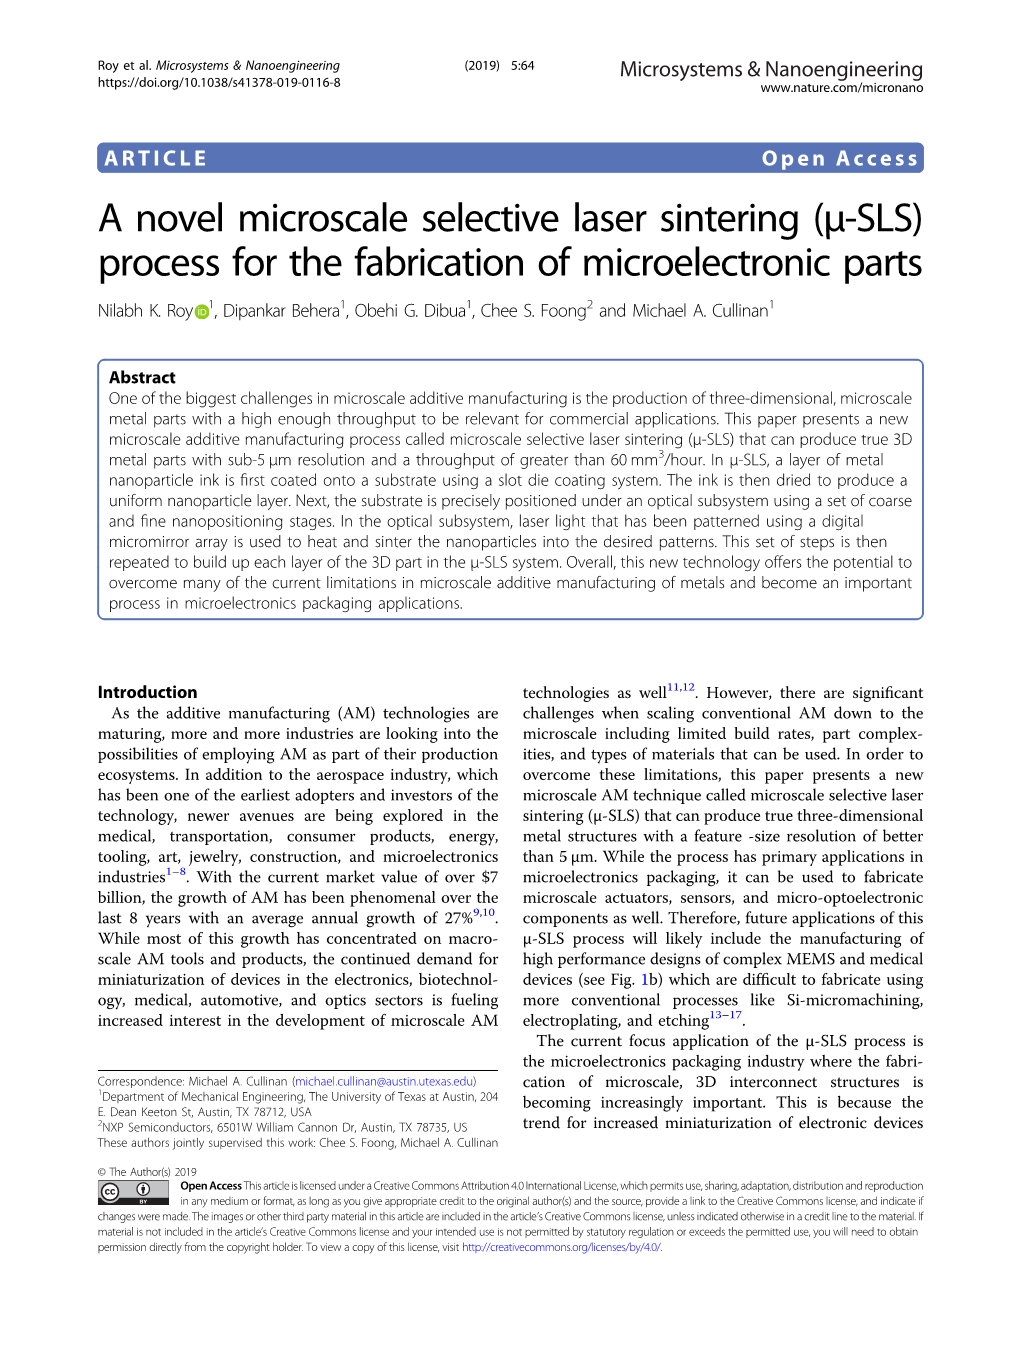 A Novel Microscale Selective Laser Sintering (Μ-SLS) Process for the Fabrication of Microelectronic Parts Nilabh K